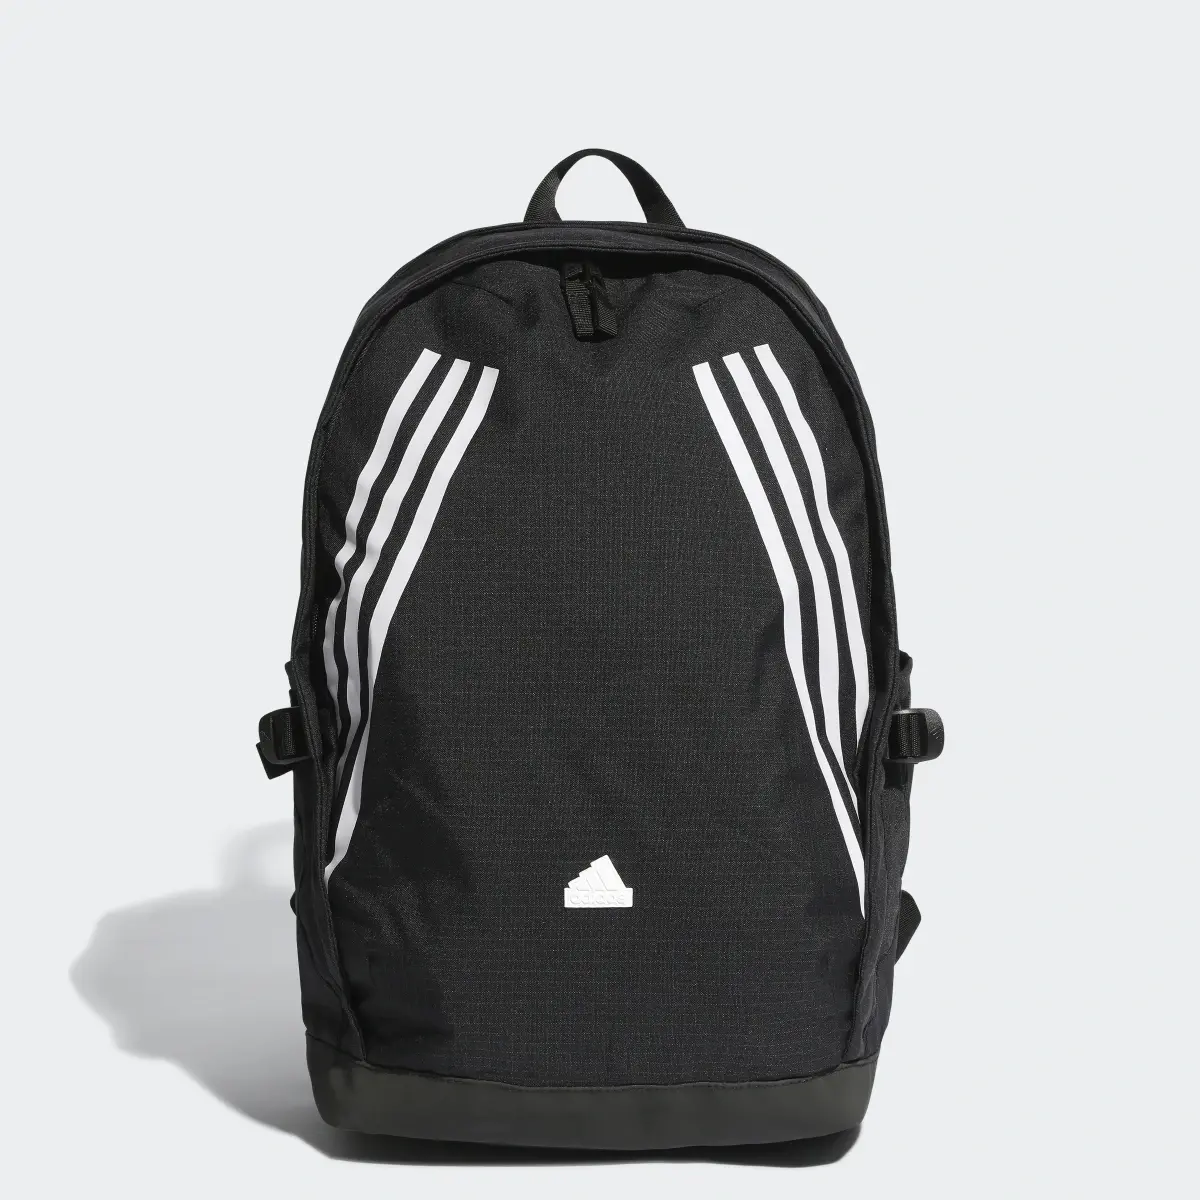 Adidas Back to School Backpack. 1